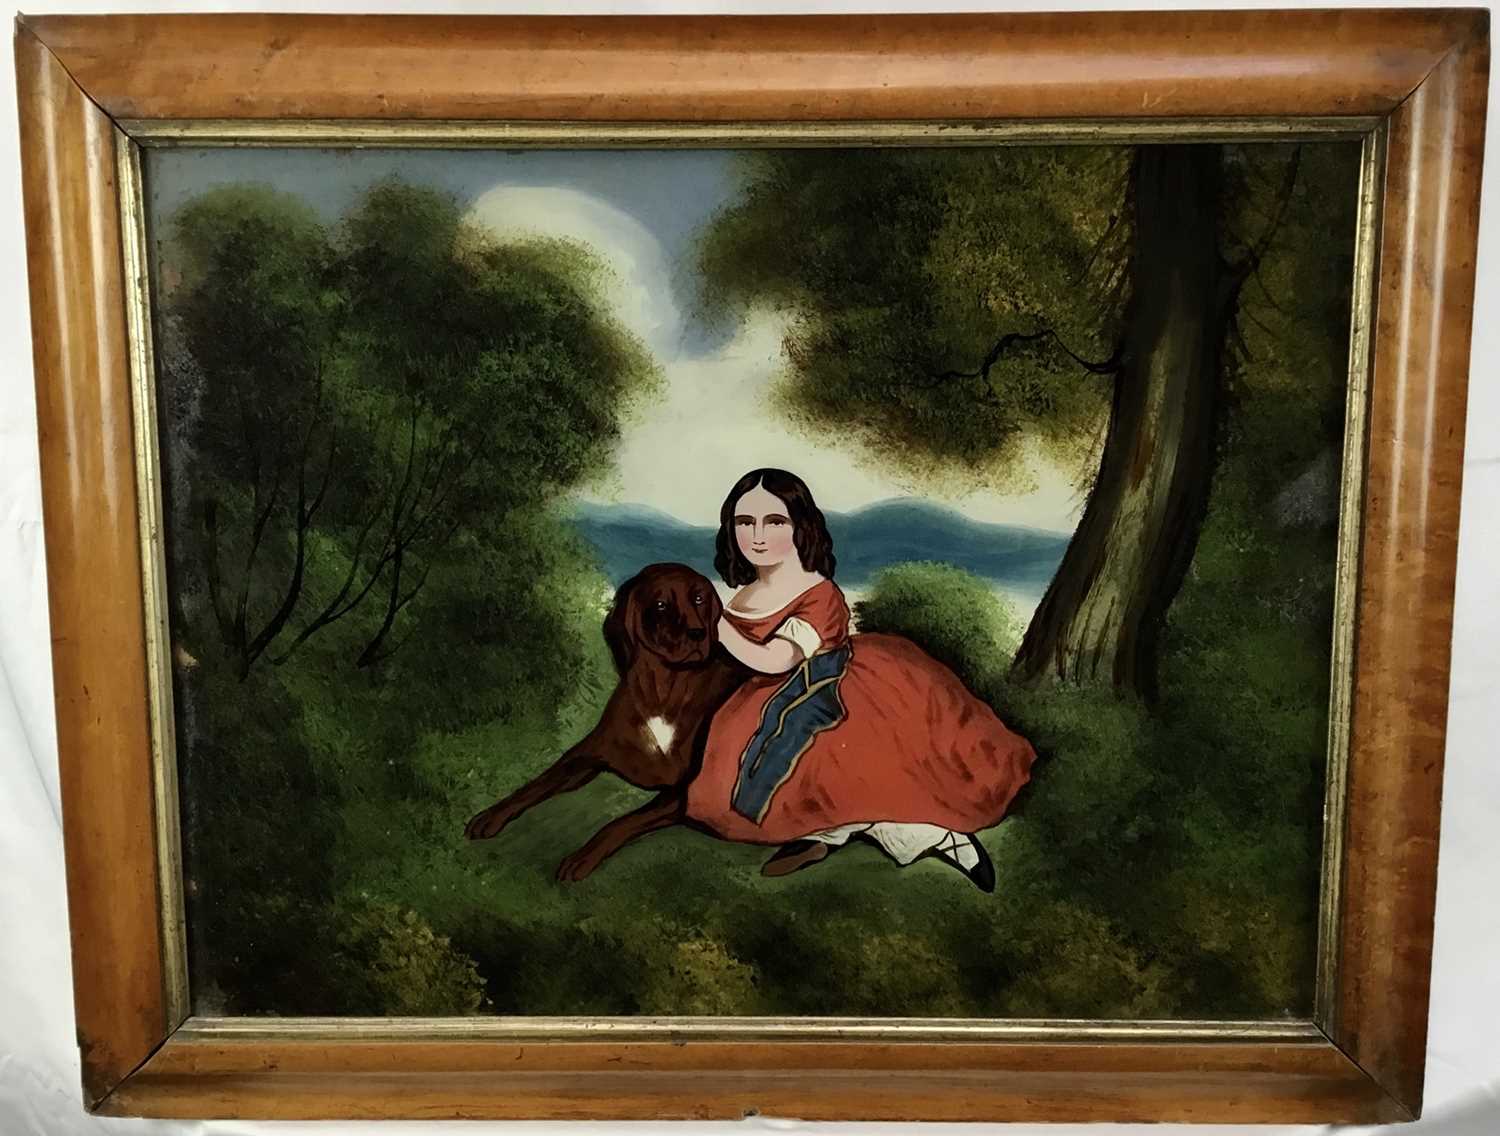 Lot 9 - 19th century reverse painting on glass depicting a girl and dog, also 19th century reverse painting on glass depicting a gypsy camp